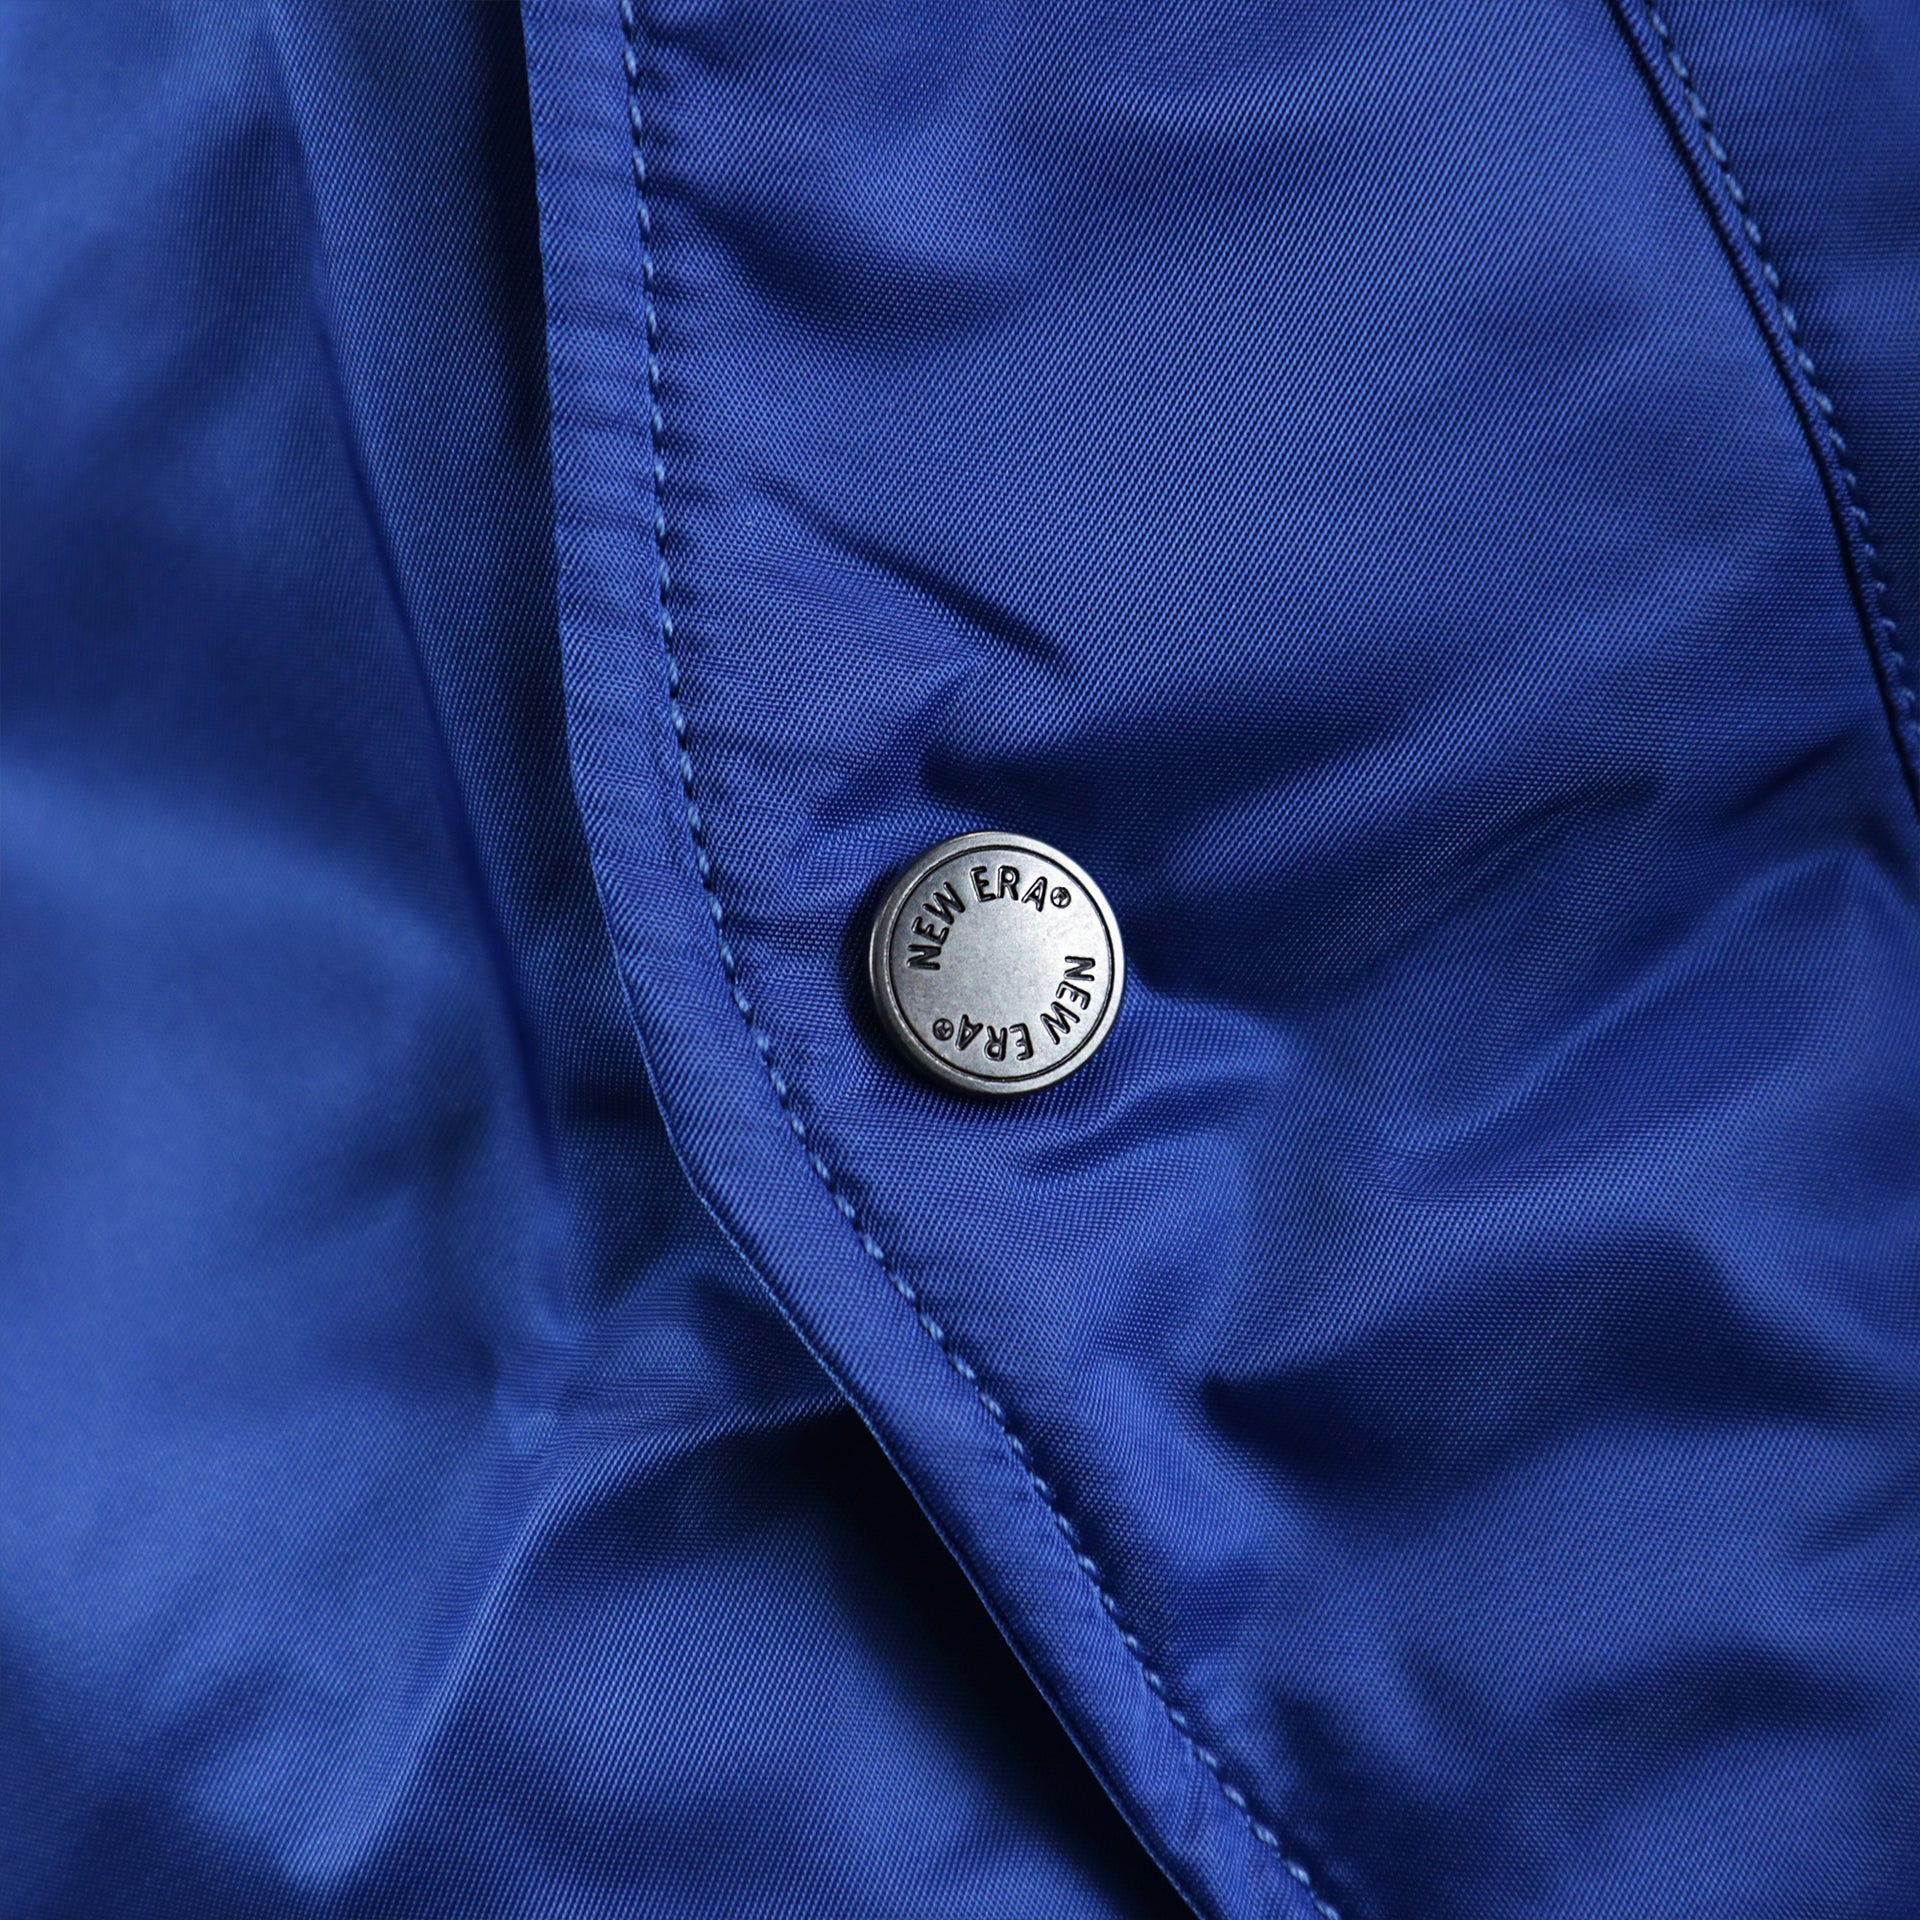 Custom Metal Button With New Era Wordmark Engrvaed on the Cooperstown Brooklyn Dodgers MLB Patch Alpha Industries Reversible Bomber Jacket With Camo Liner | Royal Blue Bomber Jacket